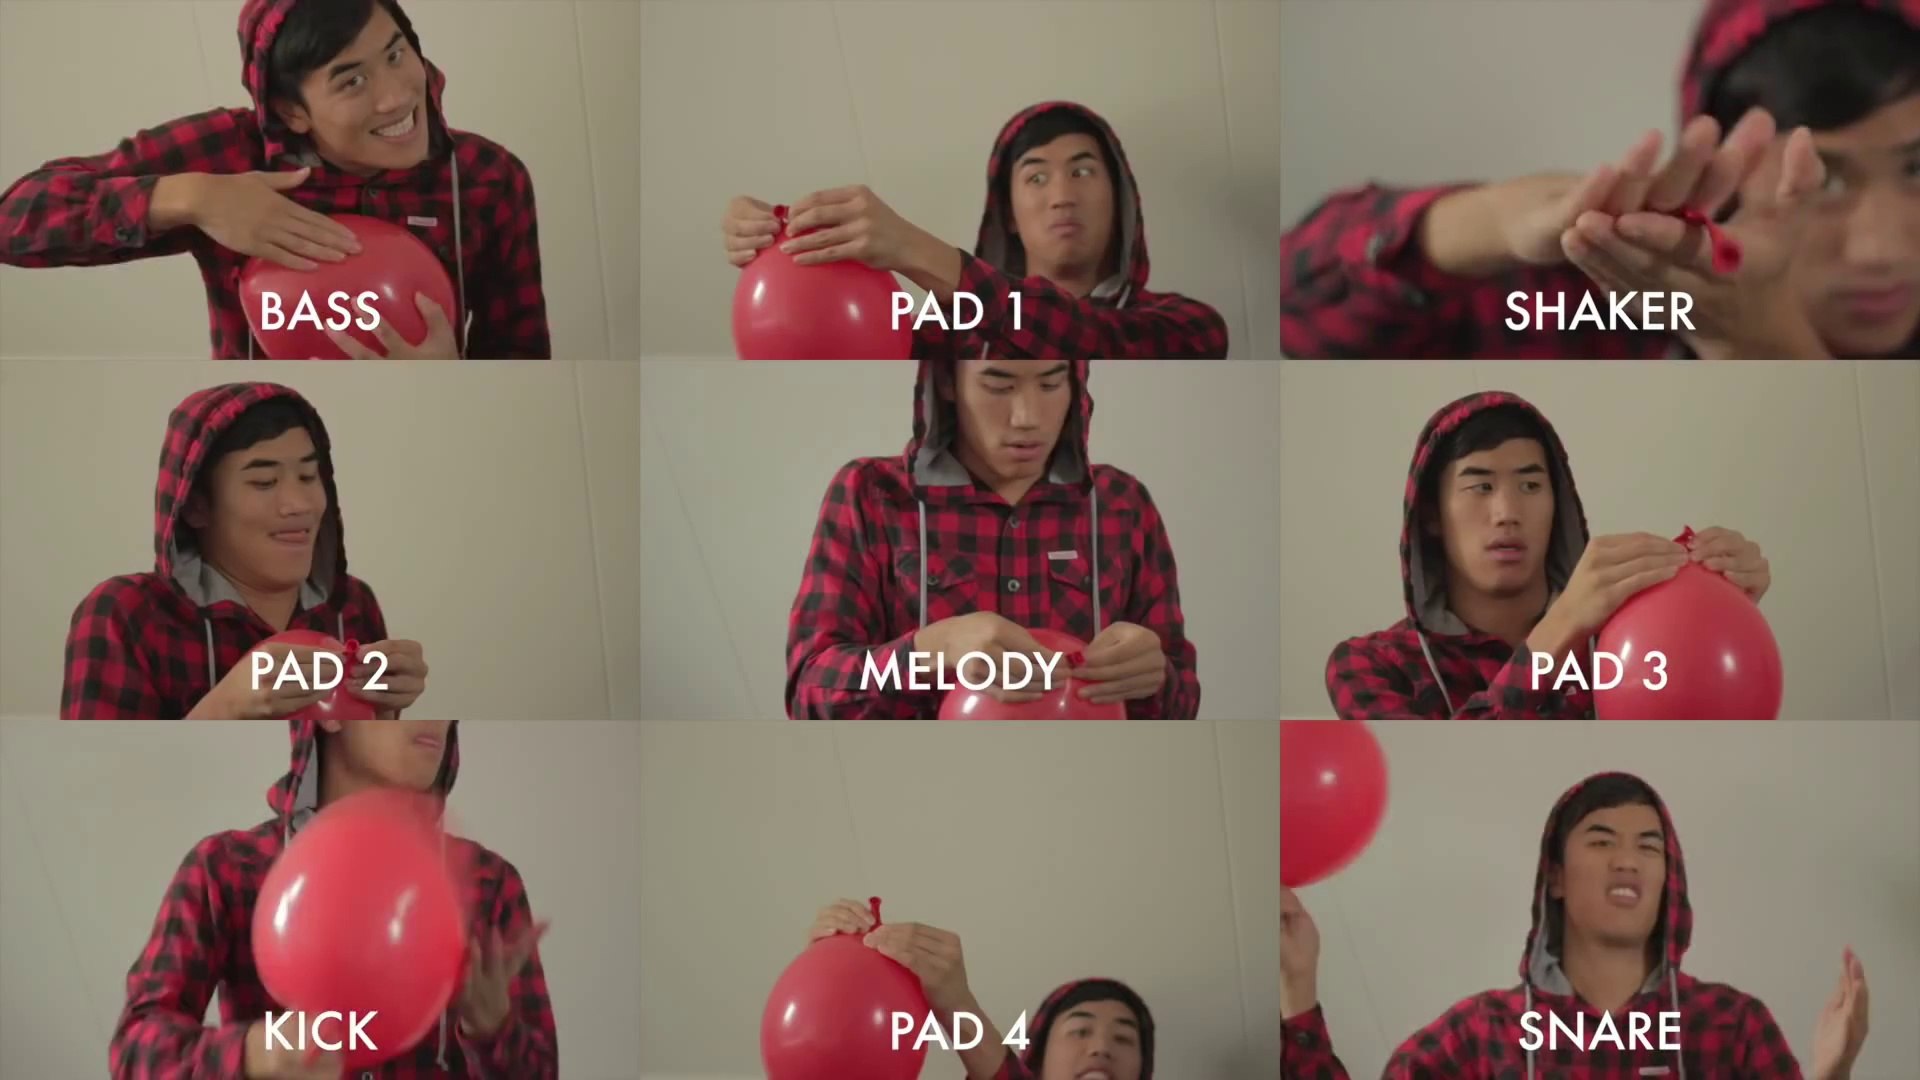 99 Red Balloons' Performed Using Red Balloons - Vidéo Dailymotion